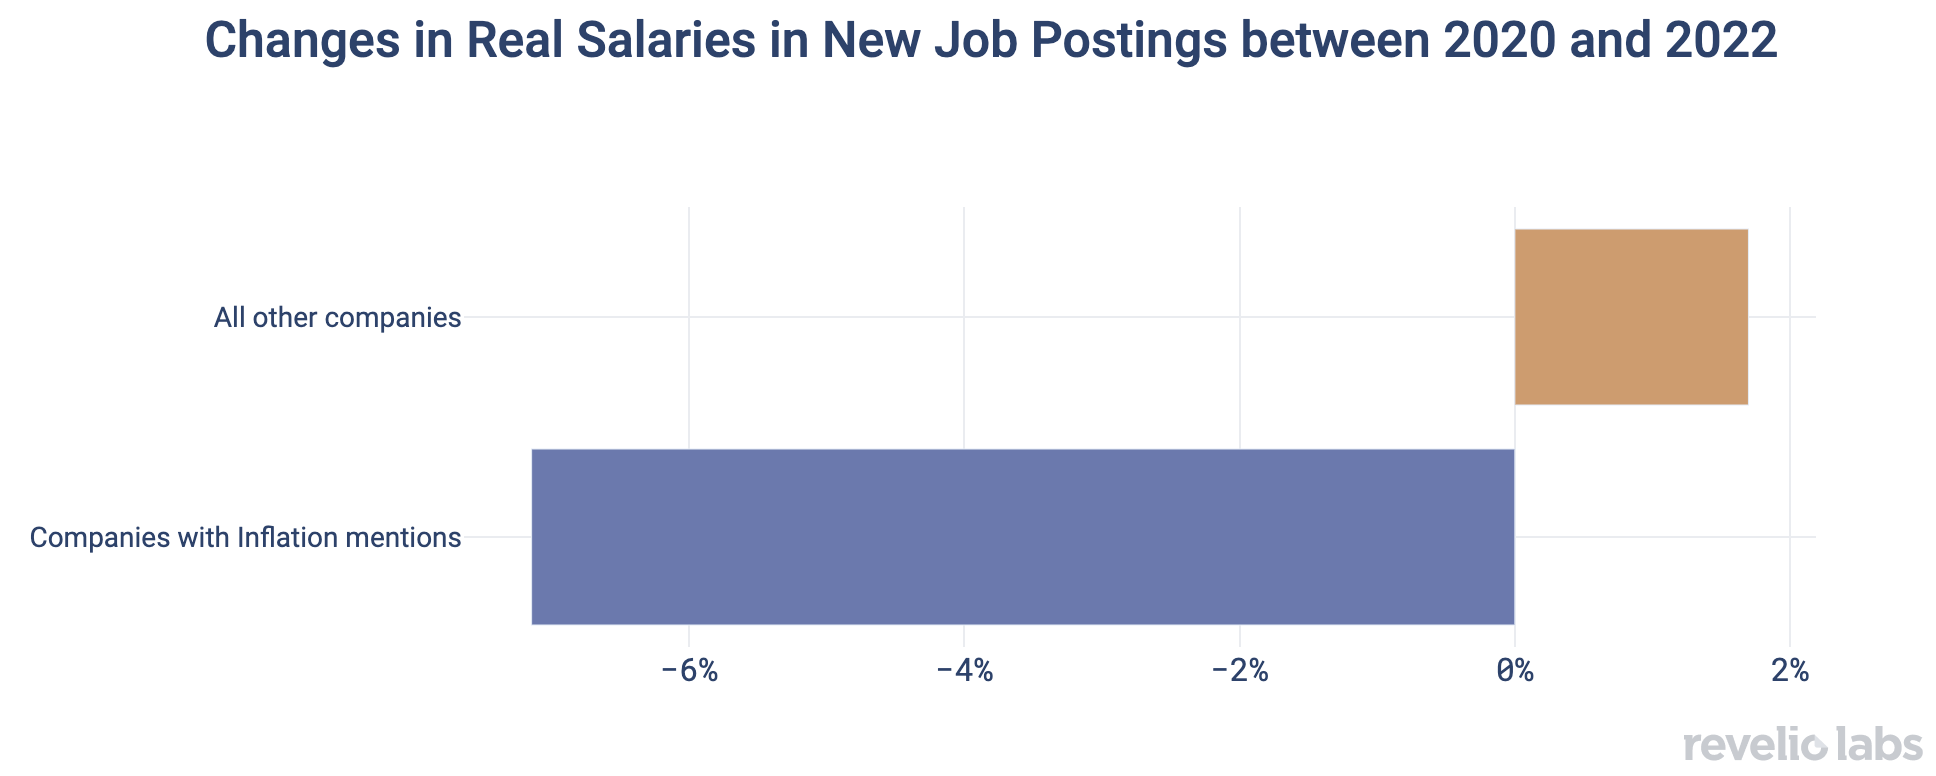 Changes in Real Salaries in New Job Postings between 2020 and 2022